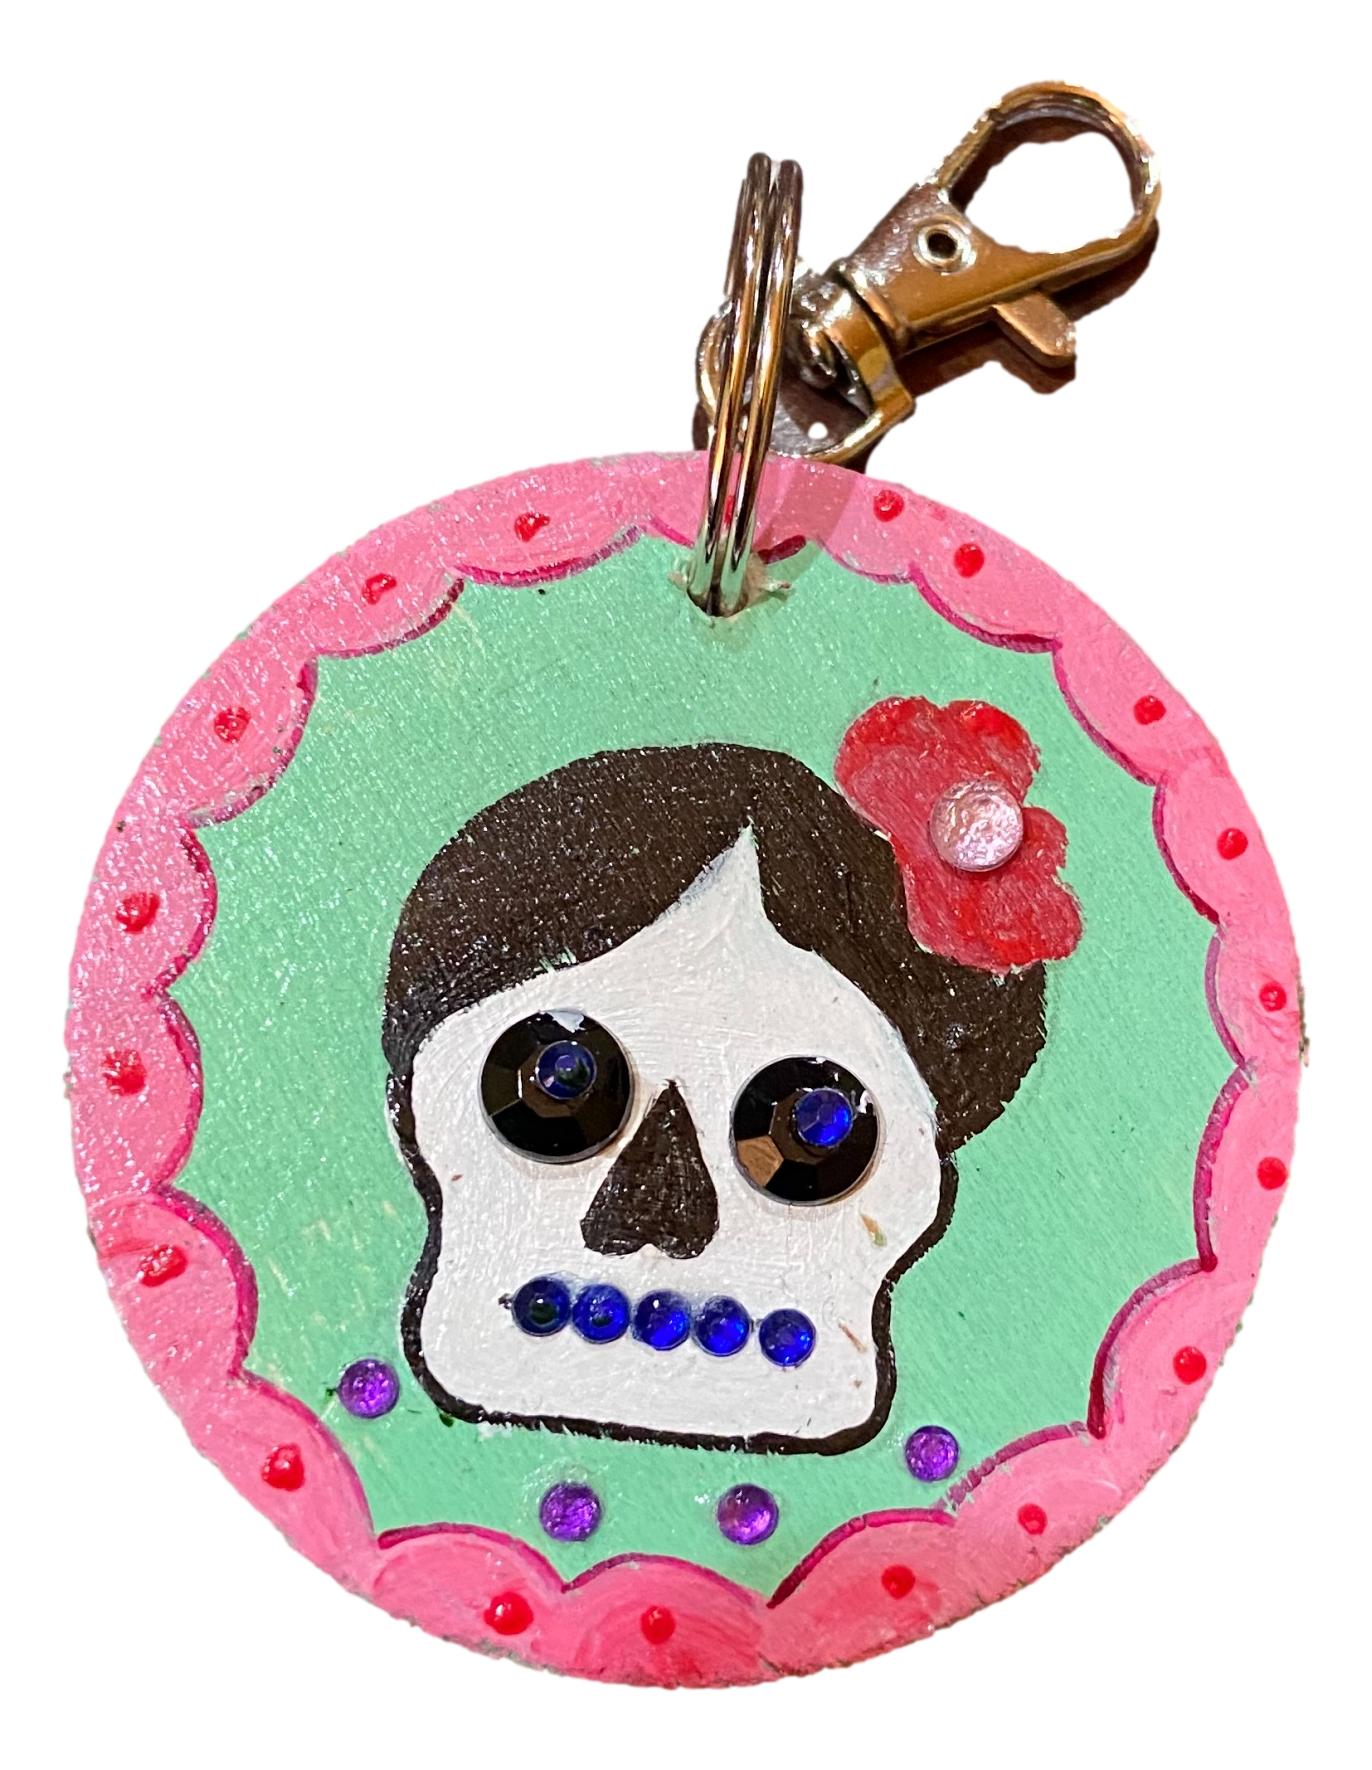 Day of The Dead Key Chain Wood 3" Calavera Handpainted By Local El Paso Artist Ray - Ysleta Mission Gift Shop- VOTED El Paso's Best Gift Shop